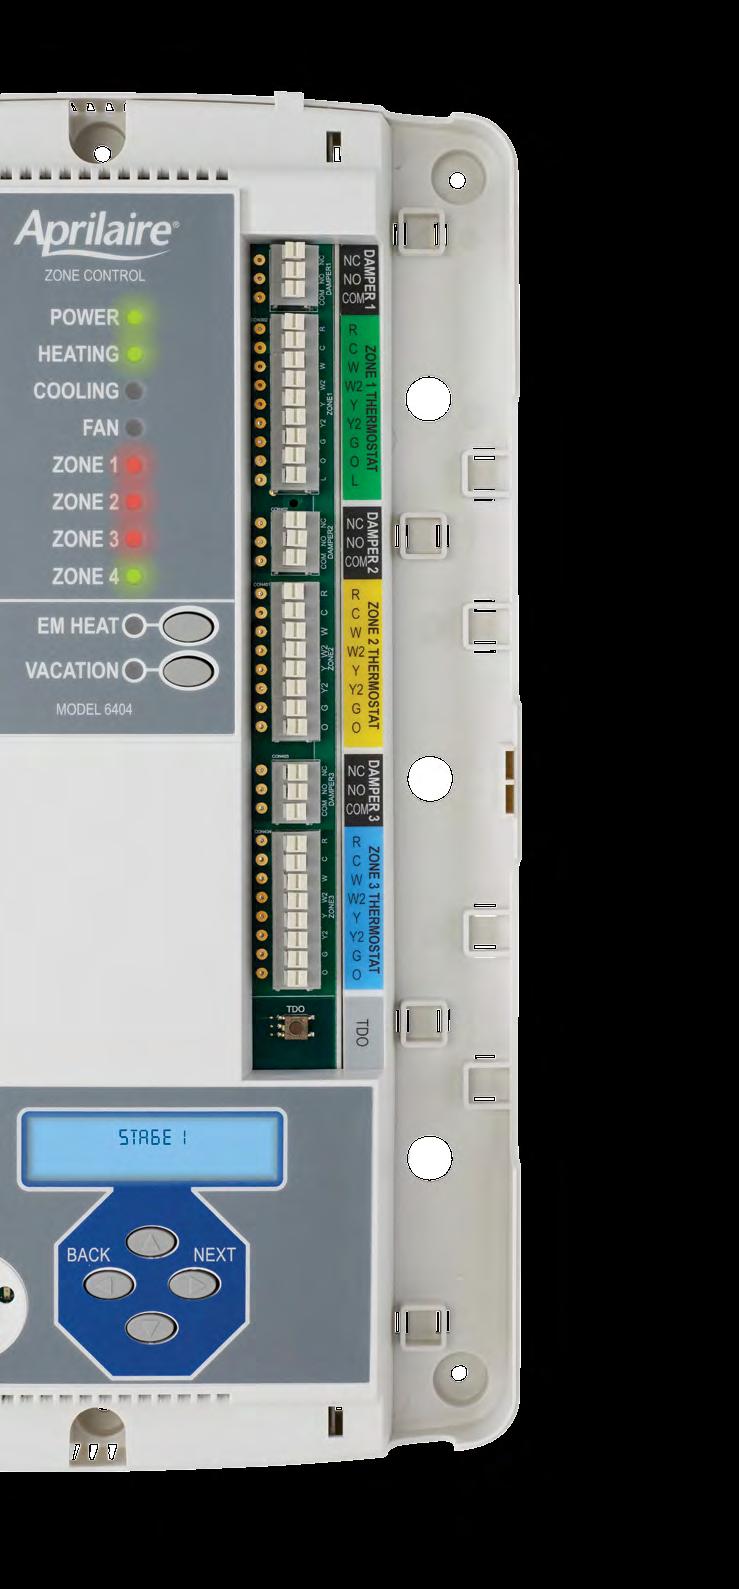 Visual Indicators + + Easy-to-see LED indicators provide status of equipment and zones + + Indicators visible without removing cover Testing and Troubleshooting + + Easily compare the zone calling